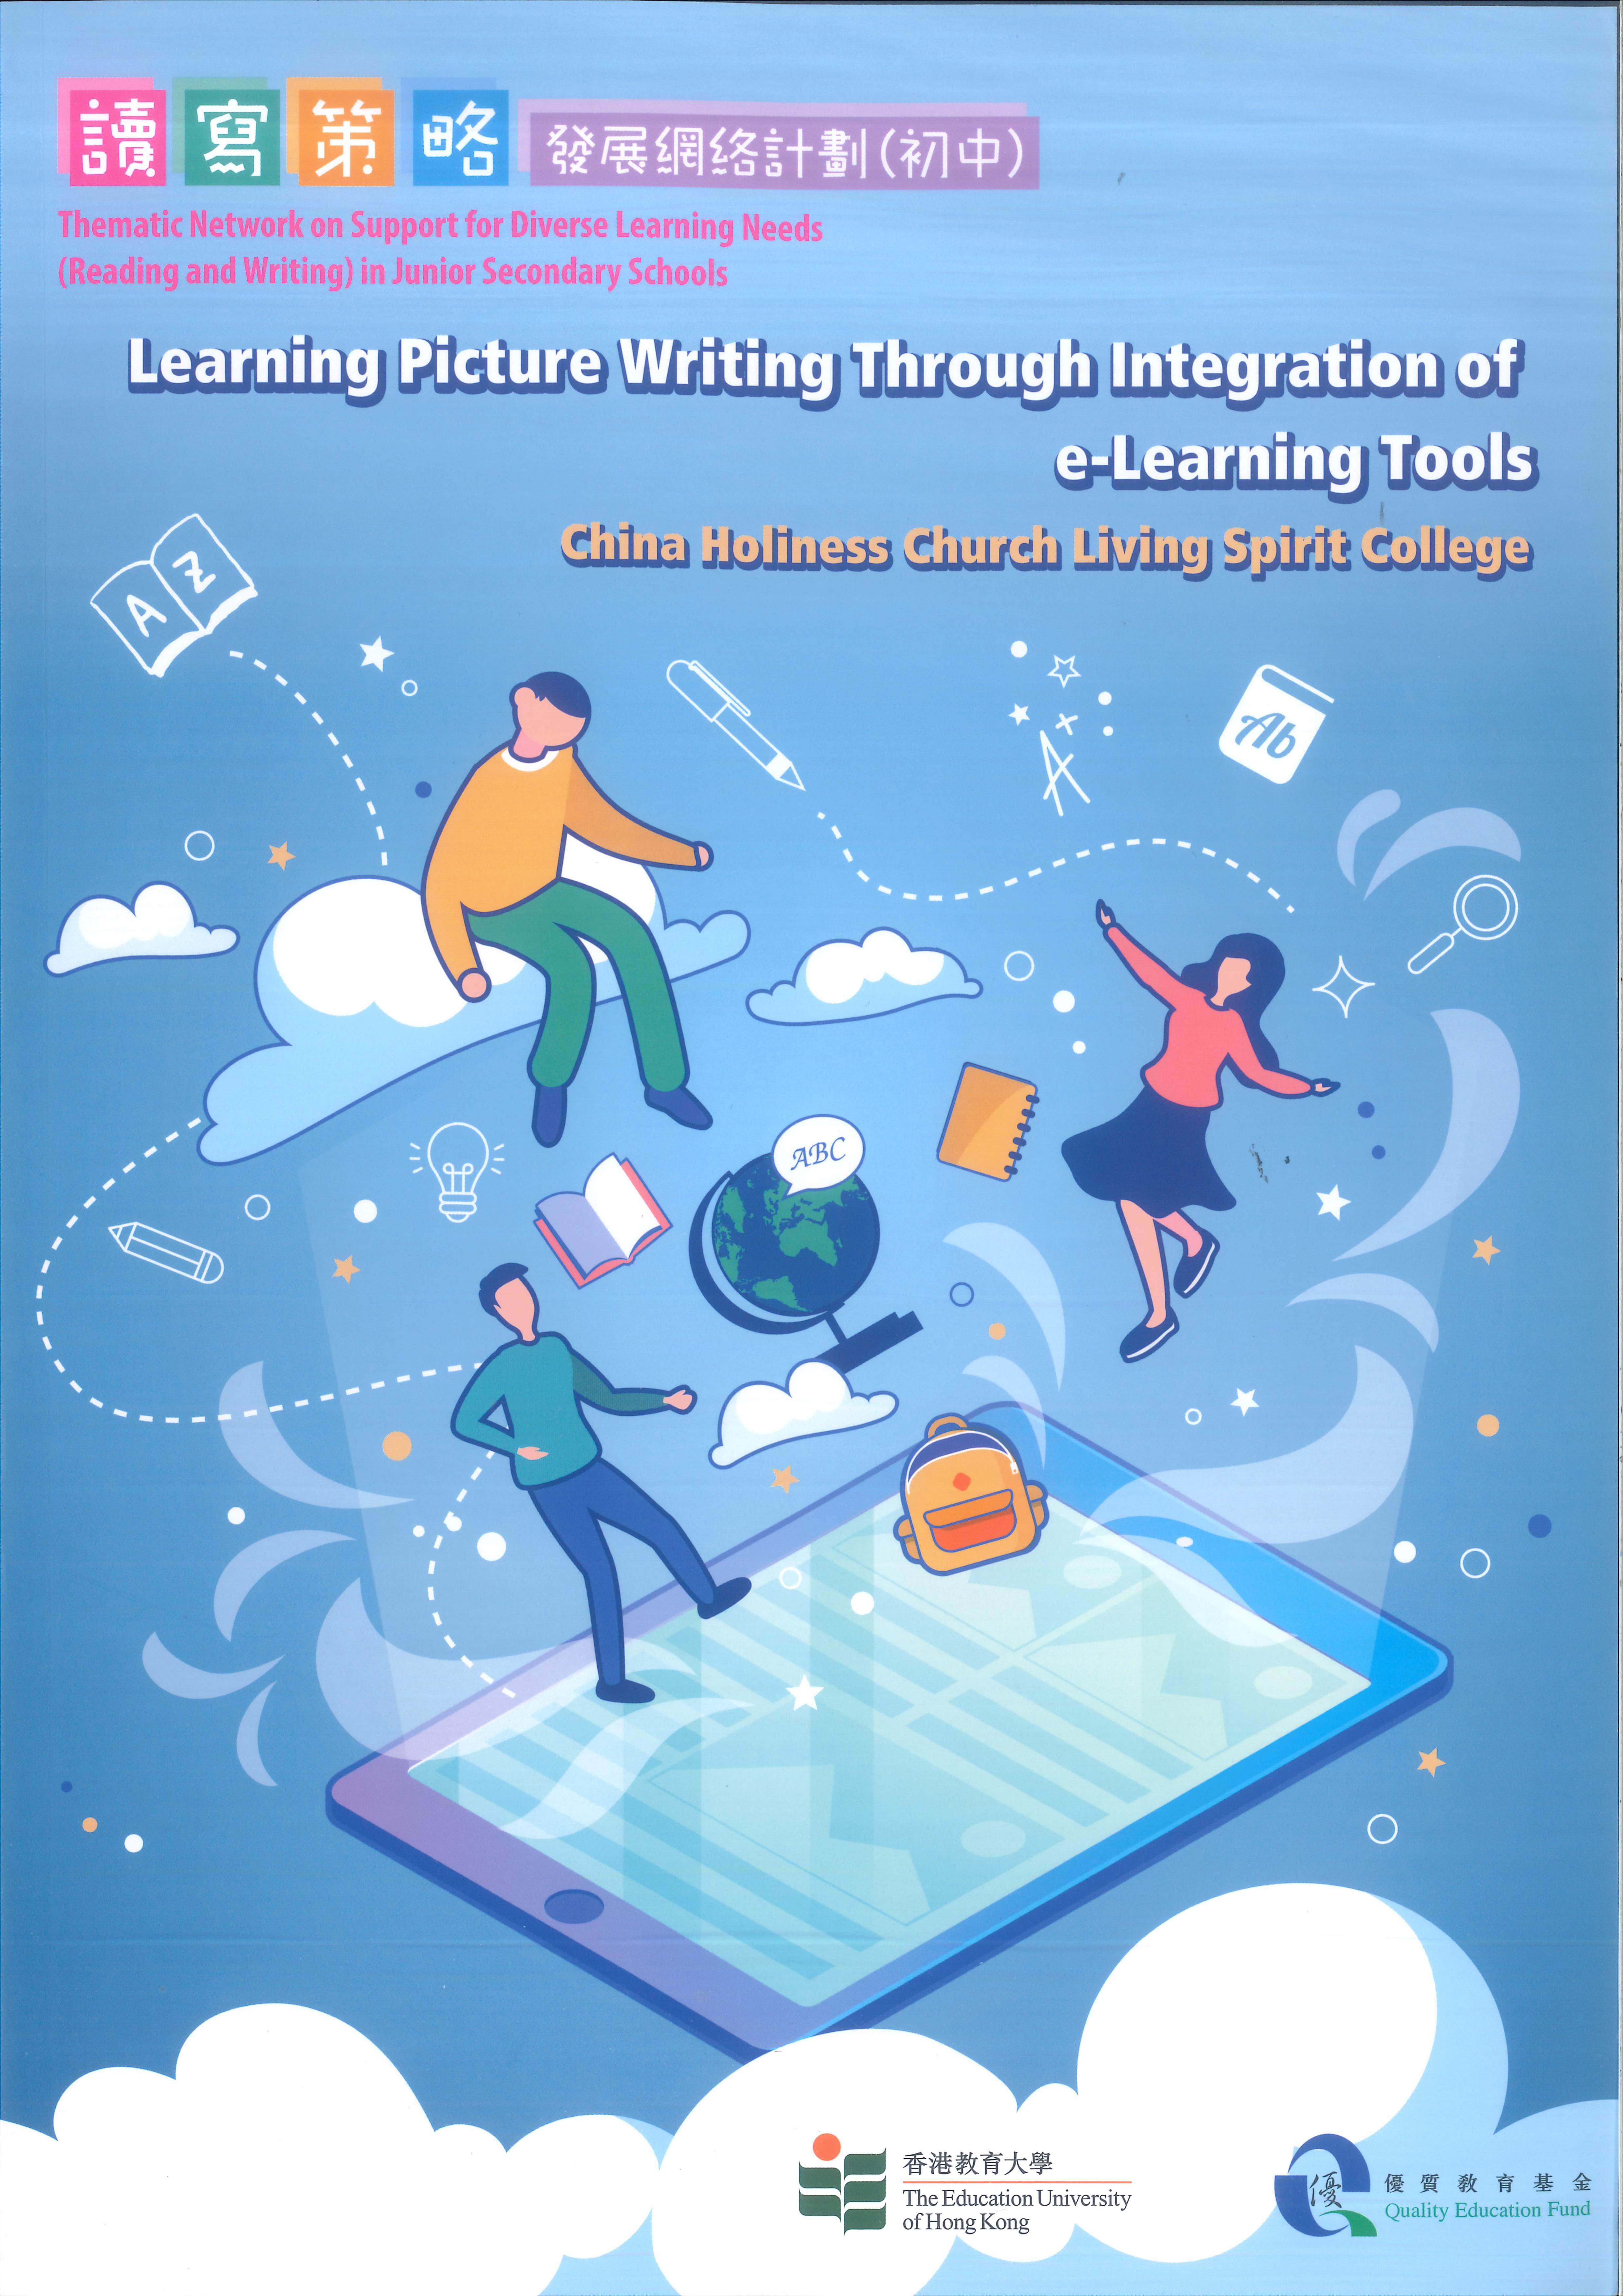 Thematic Network on Support for Diverse Learning Needs (Reading and Writing) in Junior Secondary Schools - Learning Picture Writing Through Integration of e-Learning Tools (Book)